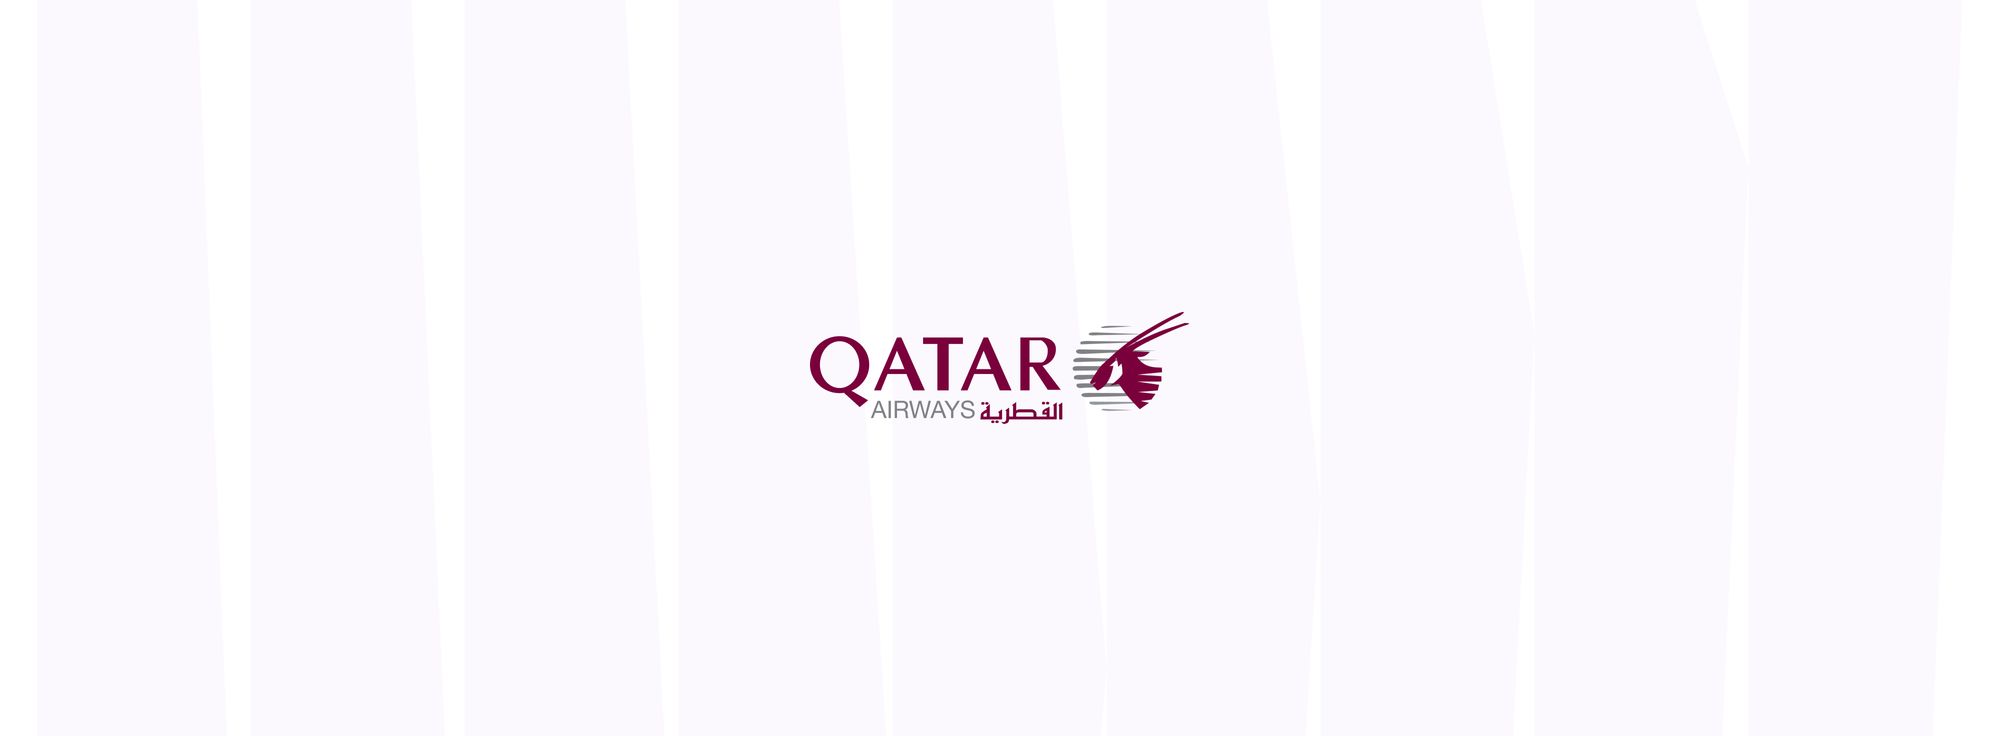 Qatar Airways - SKYTRAX’s Airline of the Year is available on Duffel